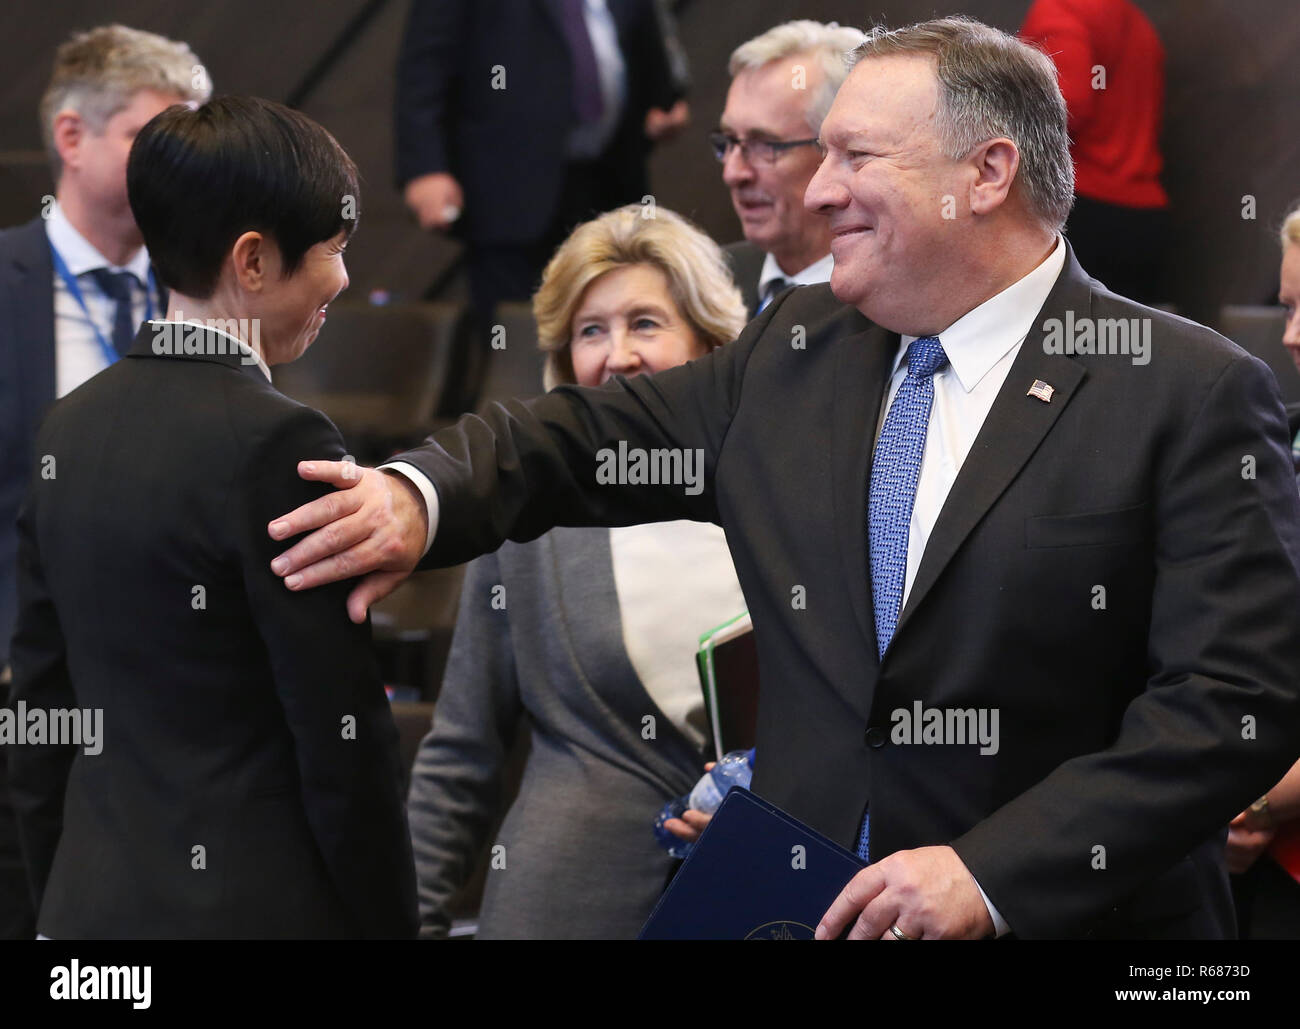 Brussels, Belgium. 4th Dec, 2018. U.S. Secretary of State Mike Pompeo (R) greets Norwegian Foreign Minister Ine Marie Eriksen Soreide during a session of the NATO foreign ministers' meeting with their Georgian and Ukrainian counterparts in Brussels, Belgium, Dec. 4, 2018. Credit: Ye Pingfan/Xinhua/Alamy Live News Stock Photo